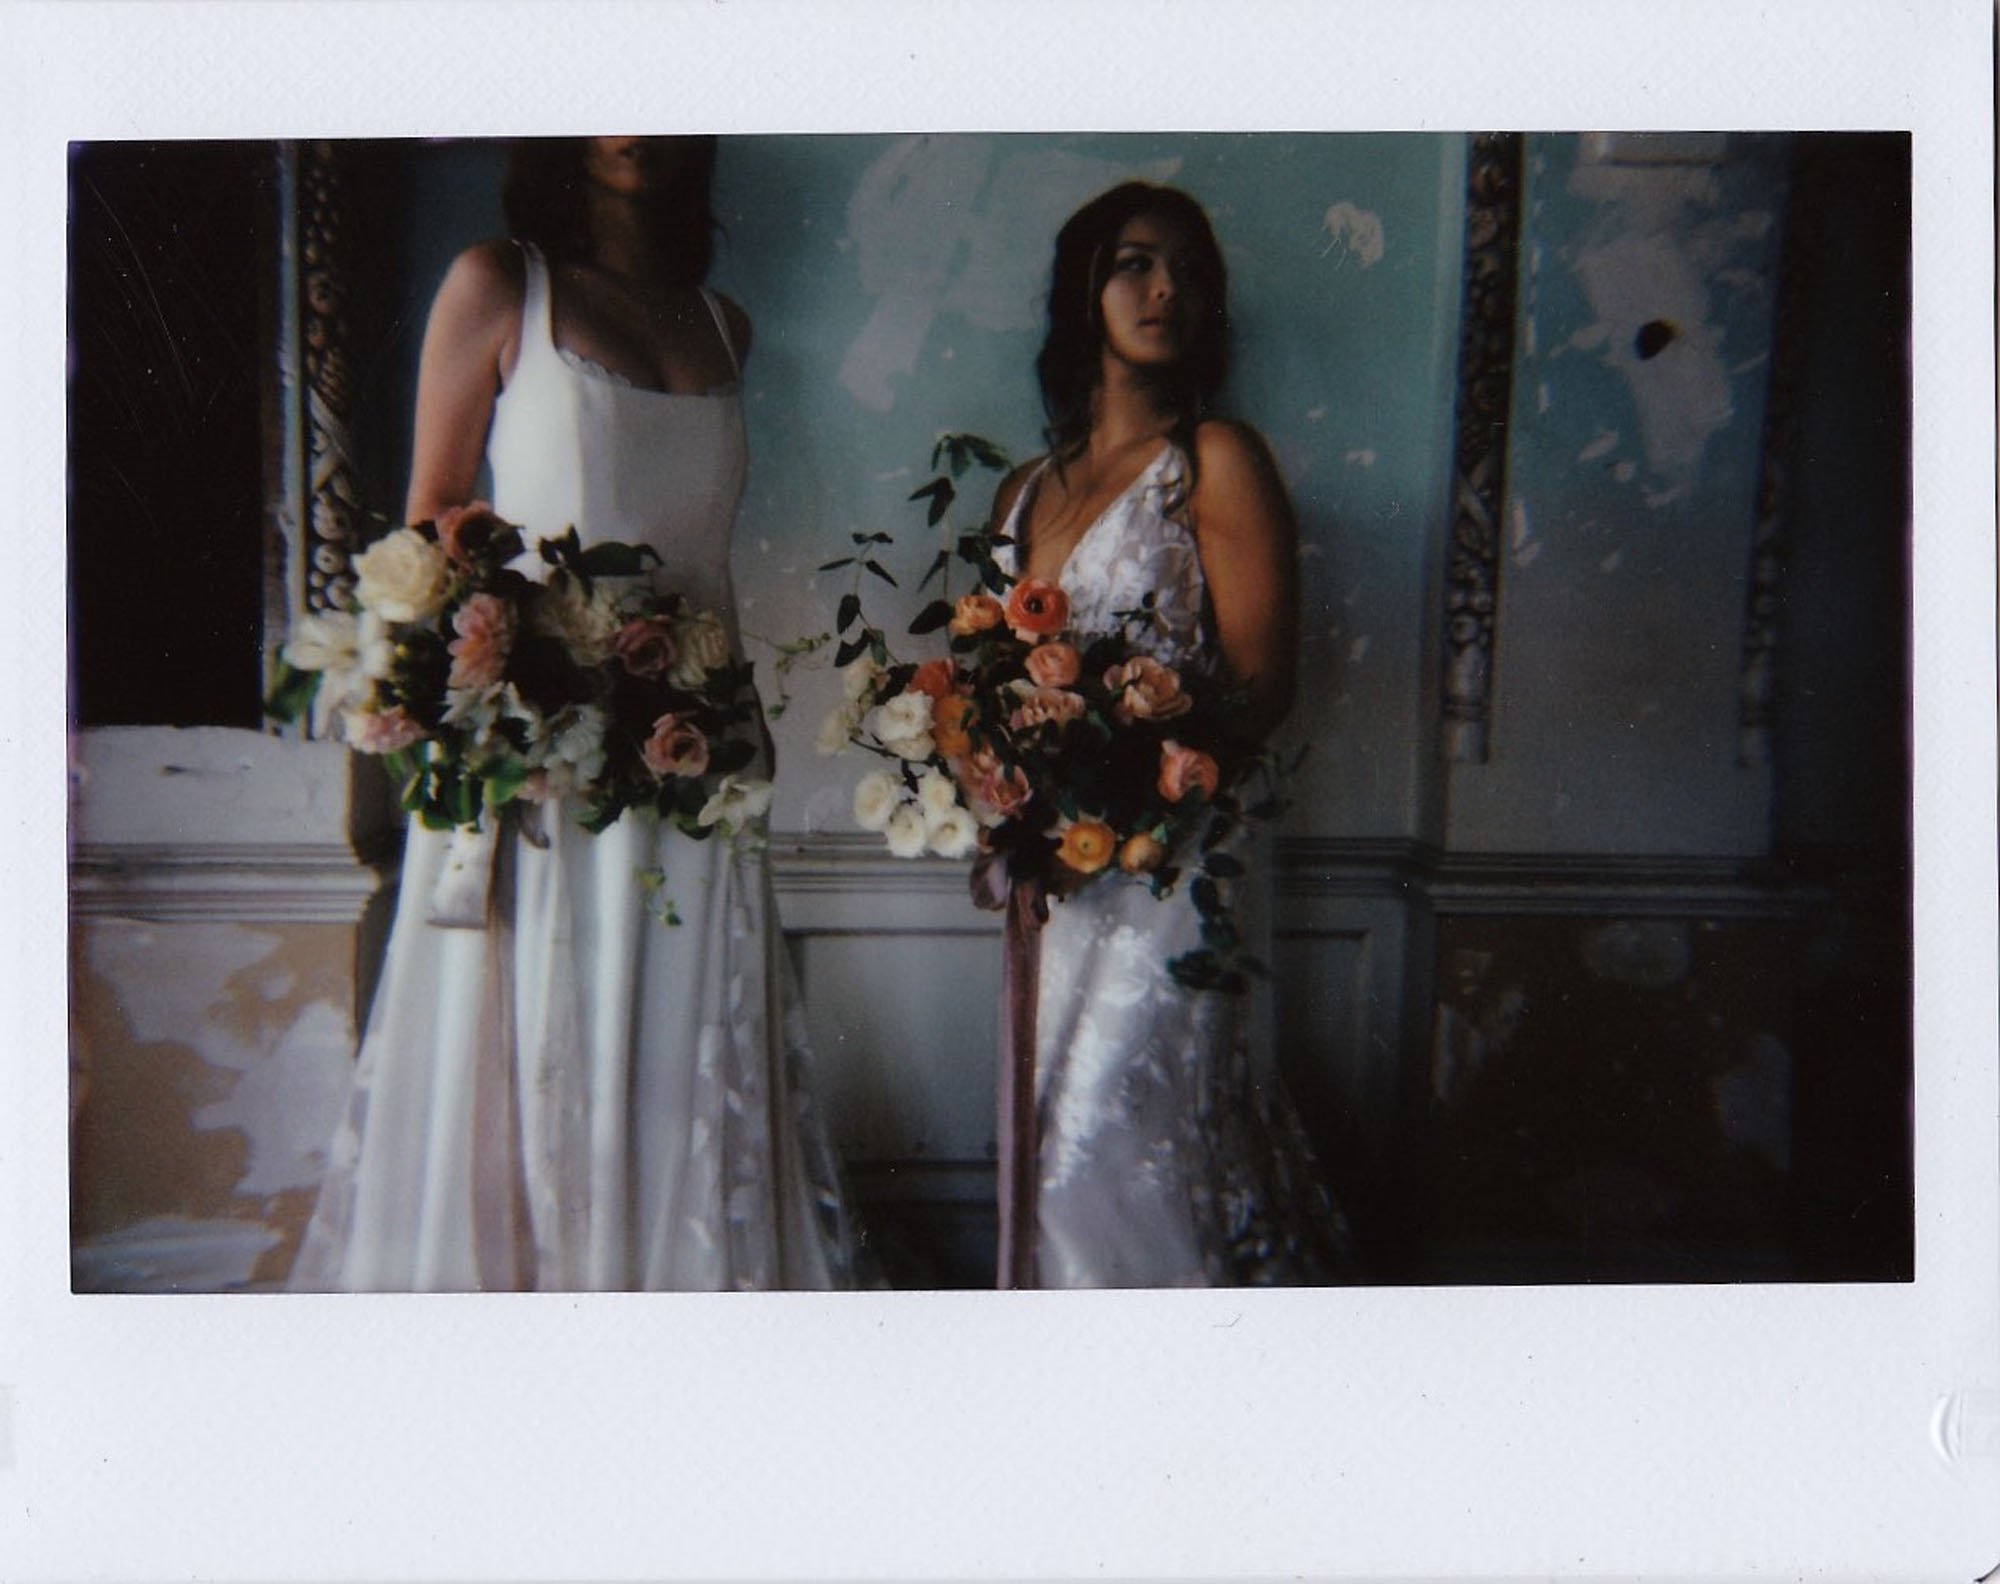  two brides standing side by side, one is wearing Alexandra Grecco Sienne wedding dress, and the other is wearing Made With love Elsie wedding dress. Both brides are holding large bridal bouquets with long romantic silk ribbons. 